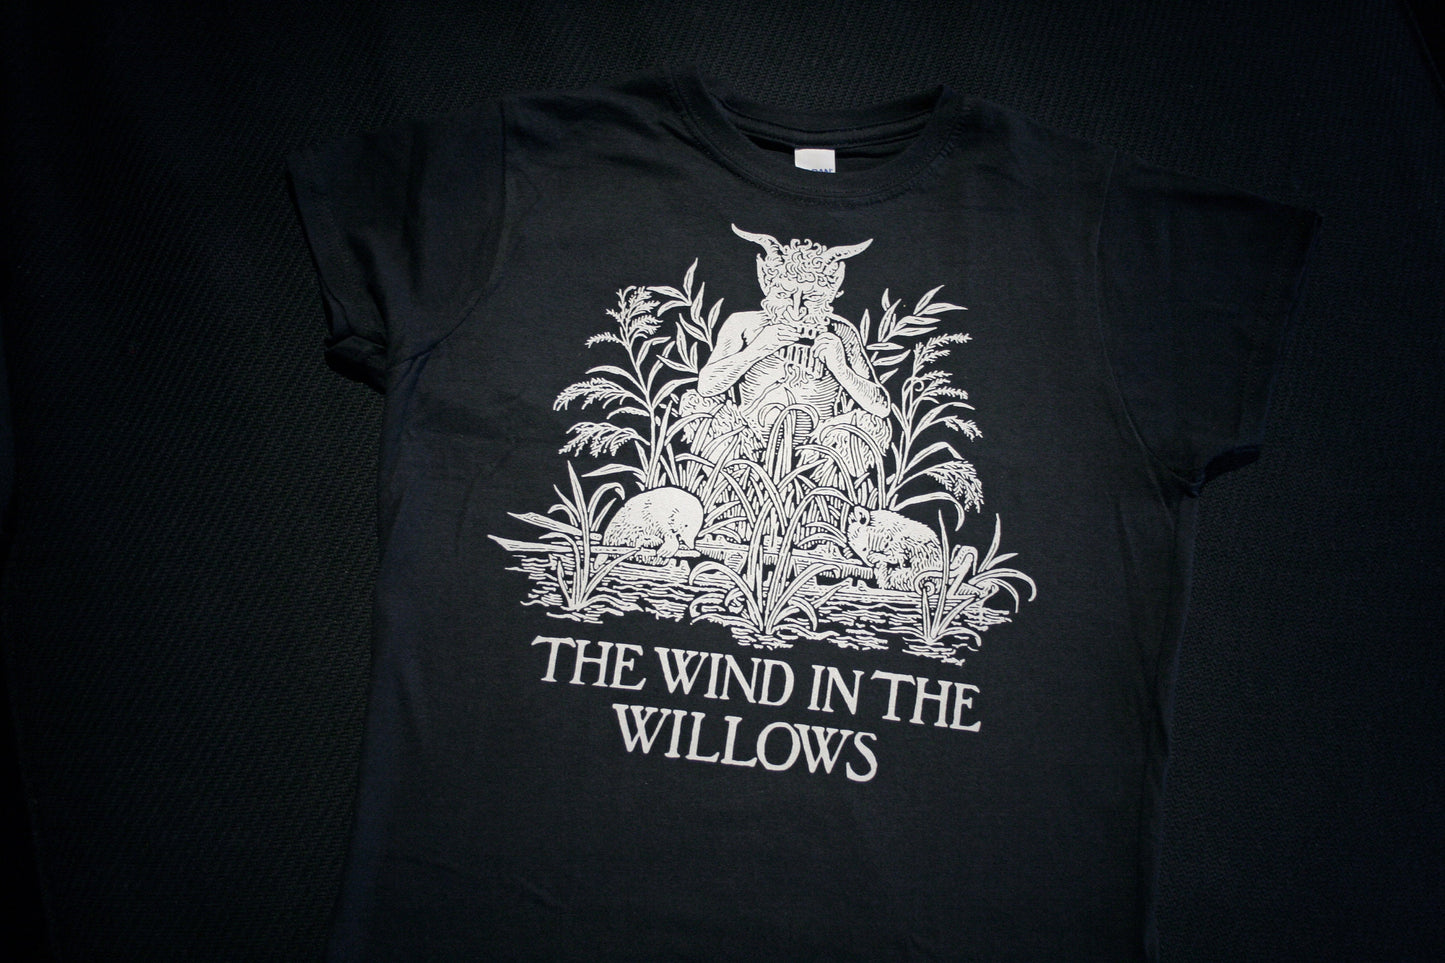 Wind in the Willows - T-shirt female fitted